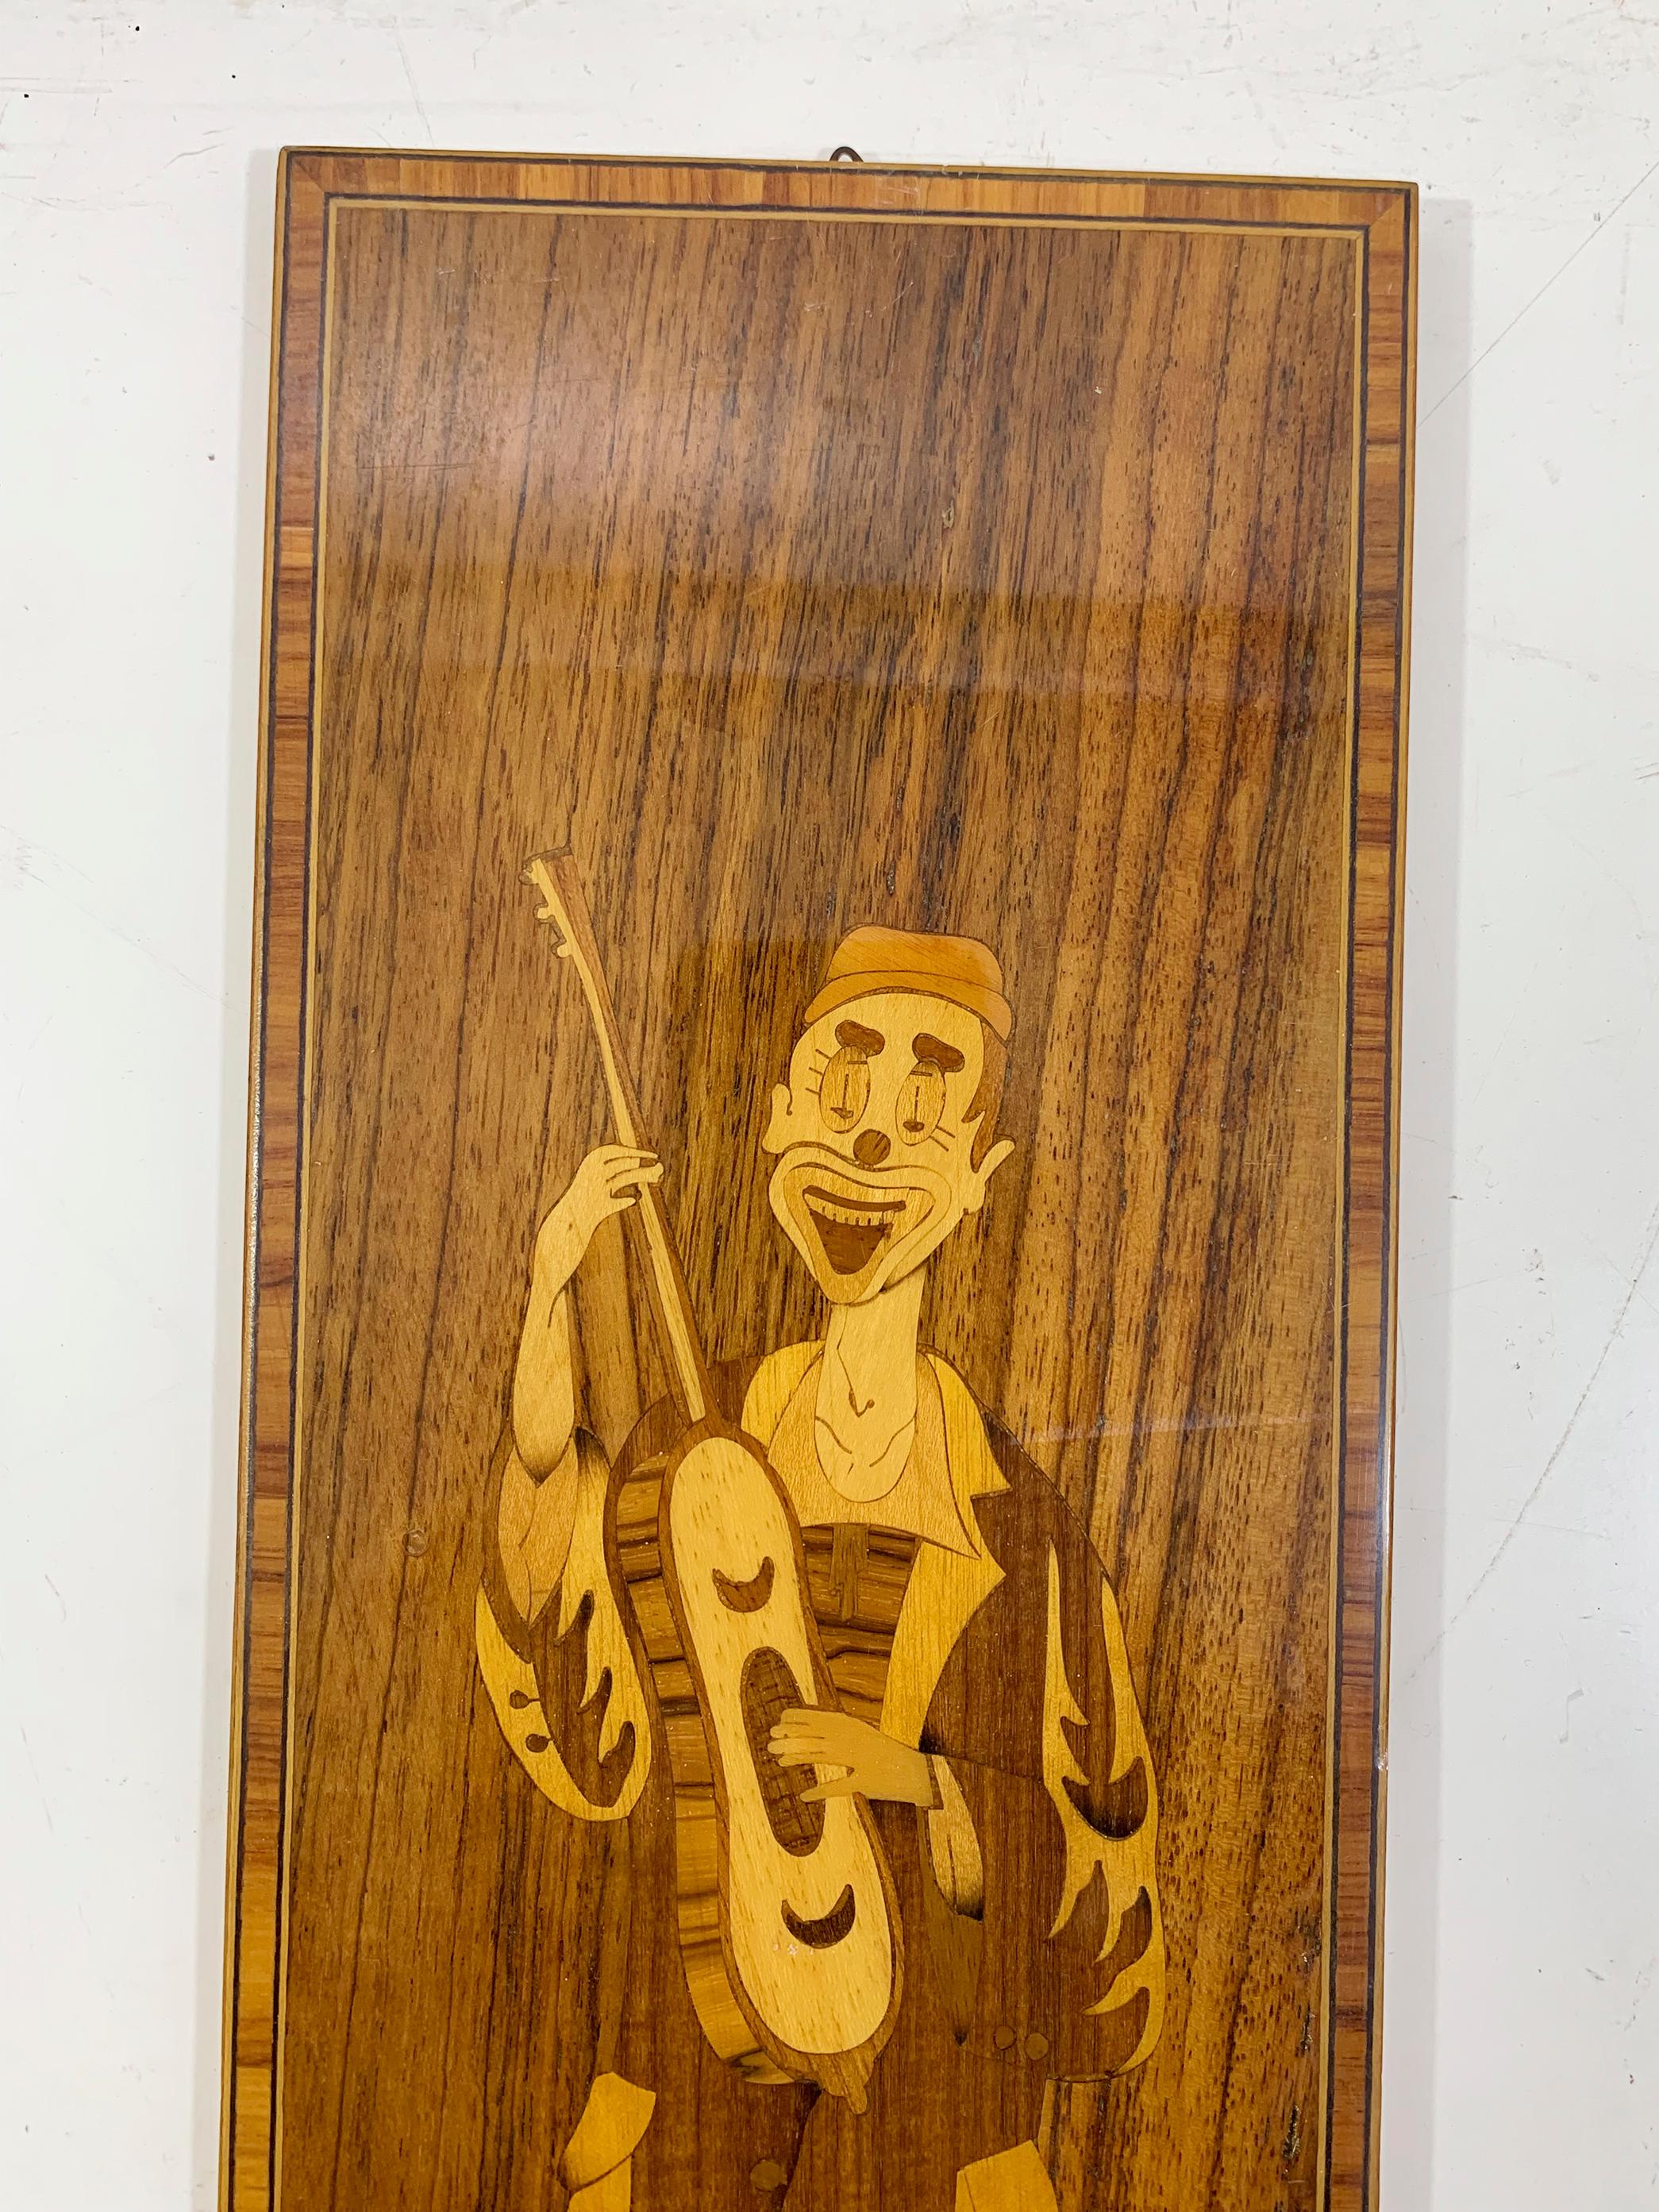 Set 2 of 3 Vintage Italian Marquetry Wood Inlay Musician Clowns Panels Stamped  en vente 1